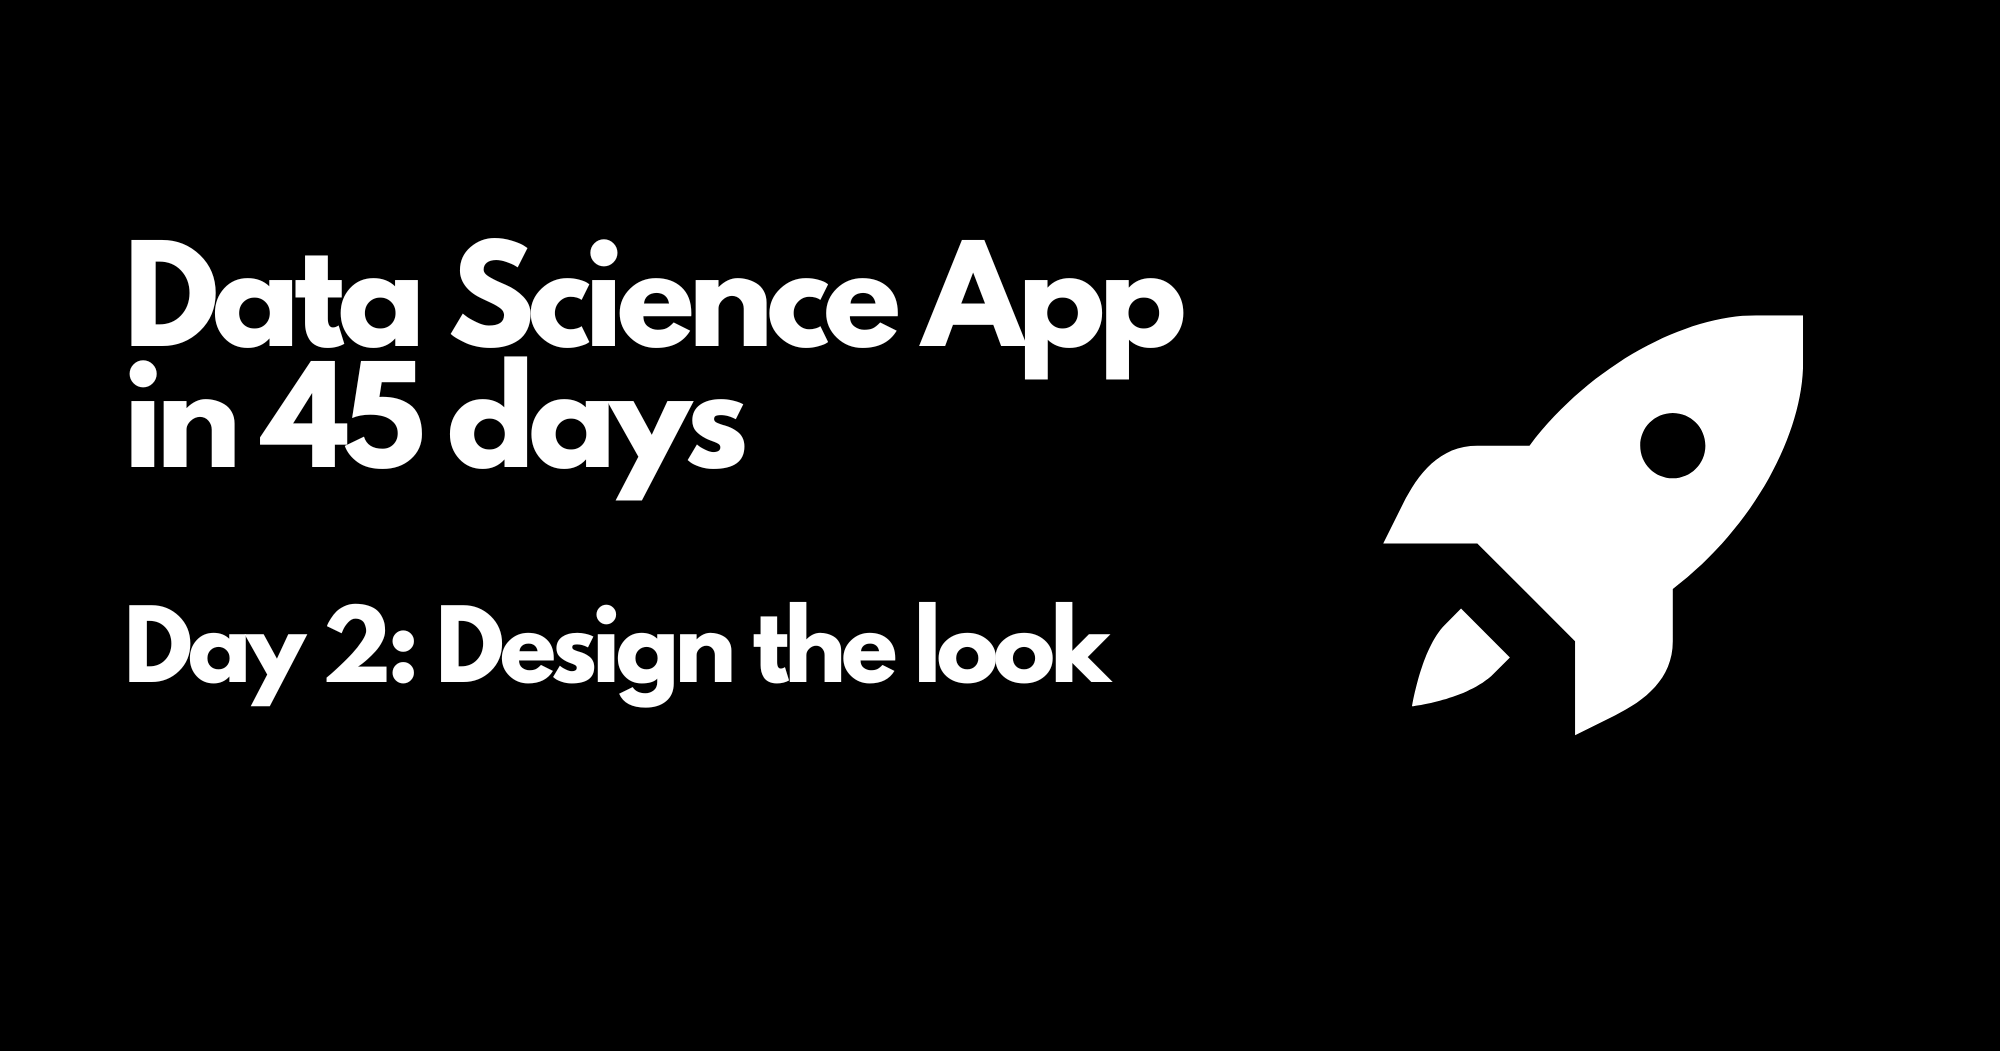 Day 2 - Data Science App in 45 days - Design the look